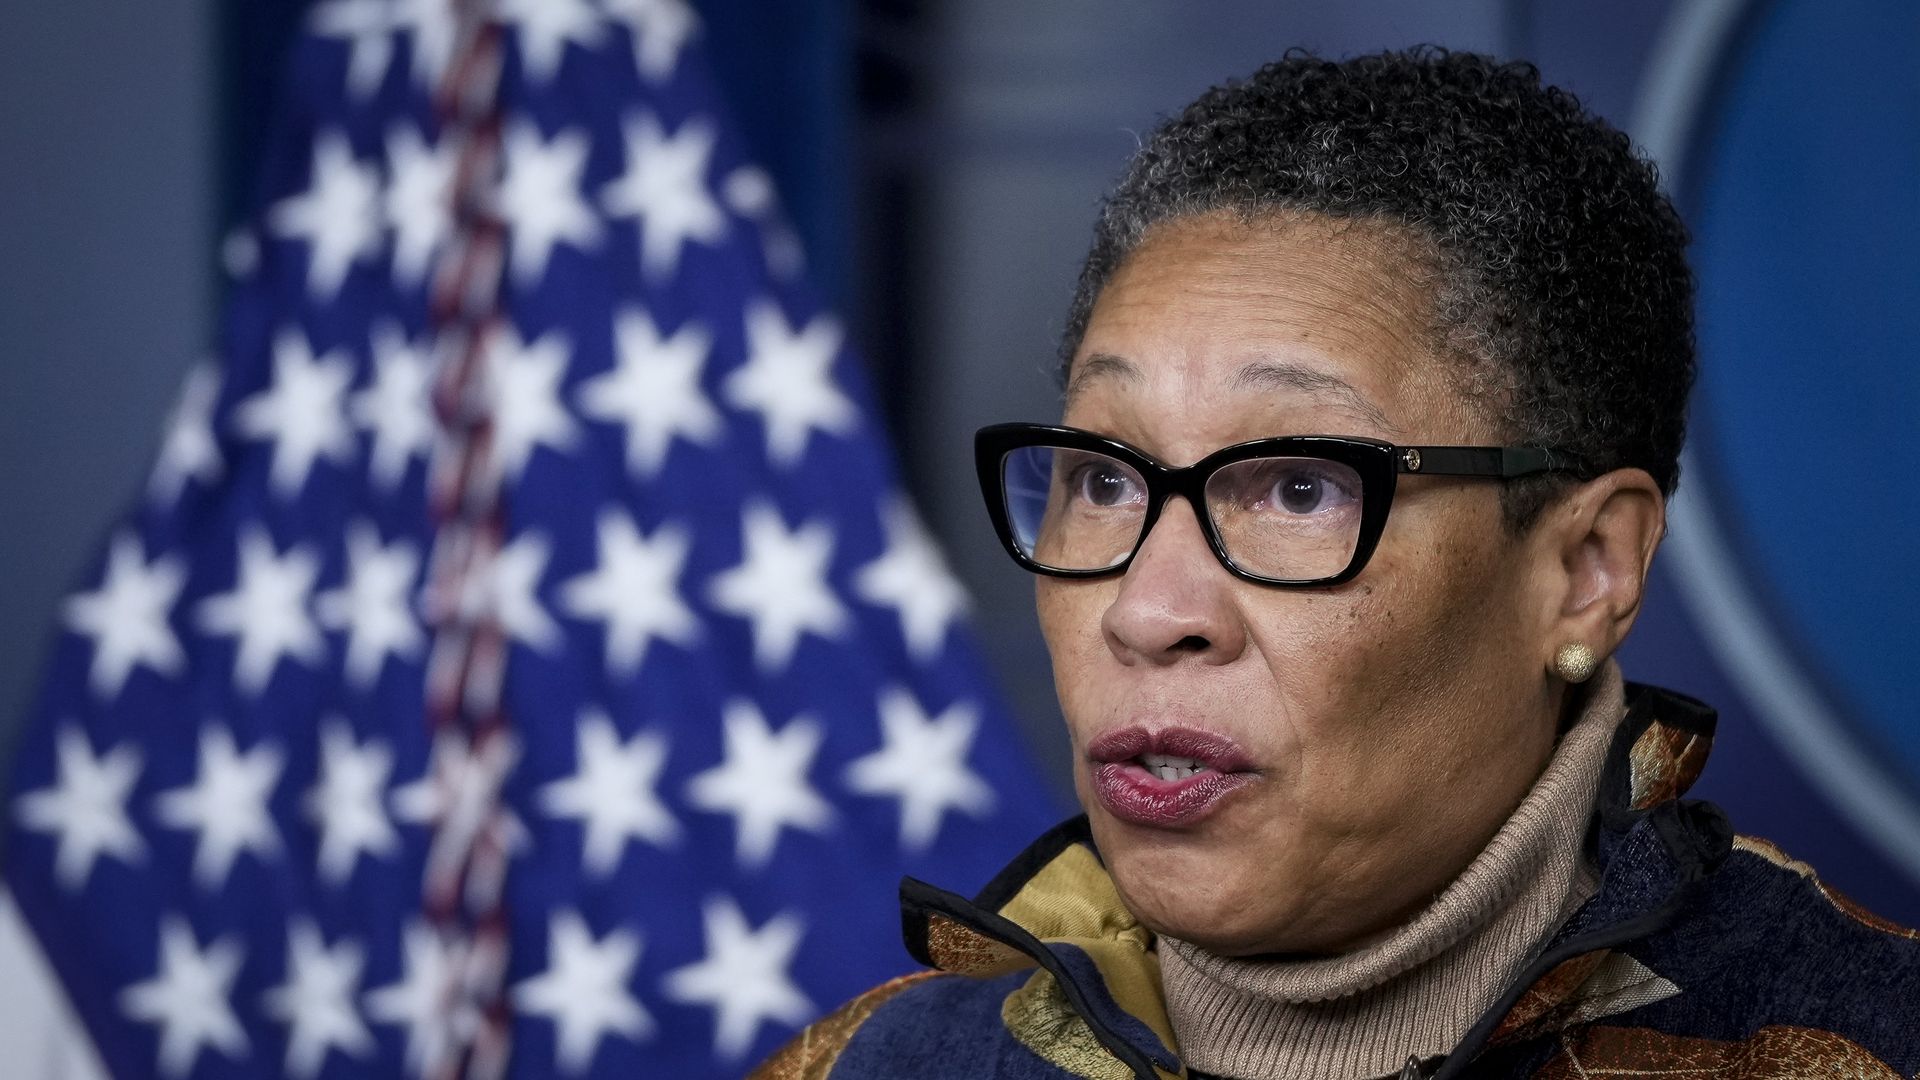 Secretary of Housing and Urban Development Marcia Fudge speaking at a press conference at the White House in March 2021.